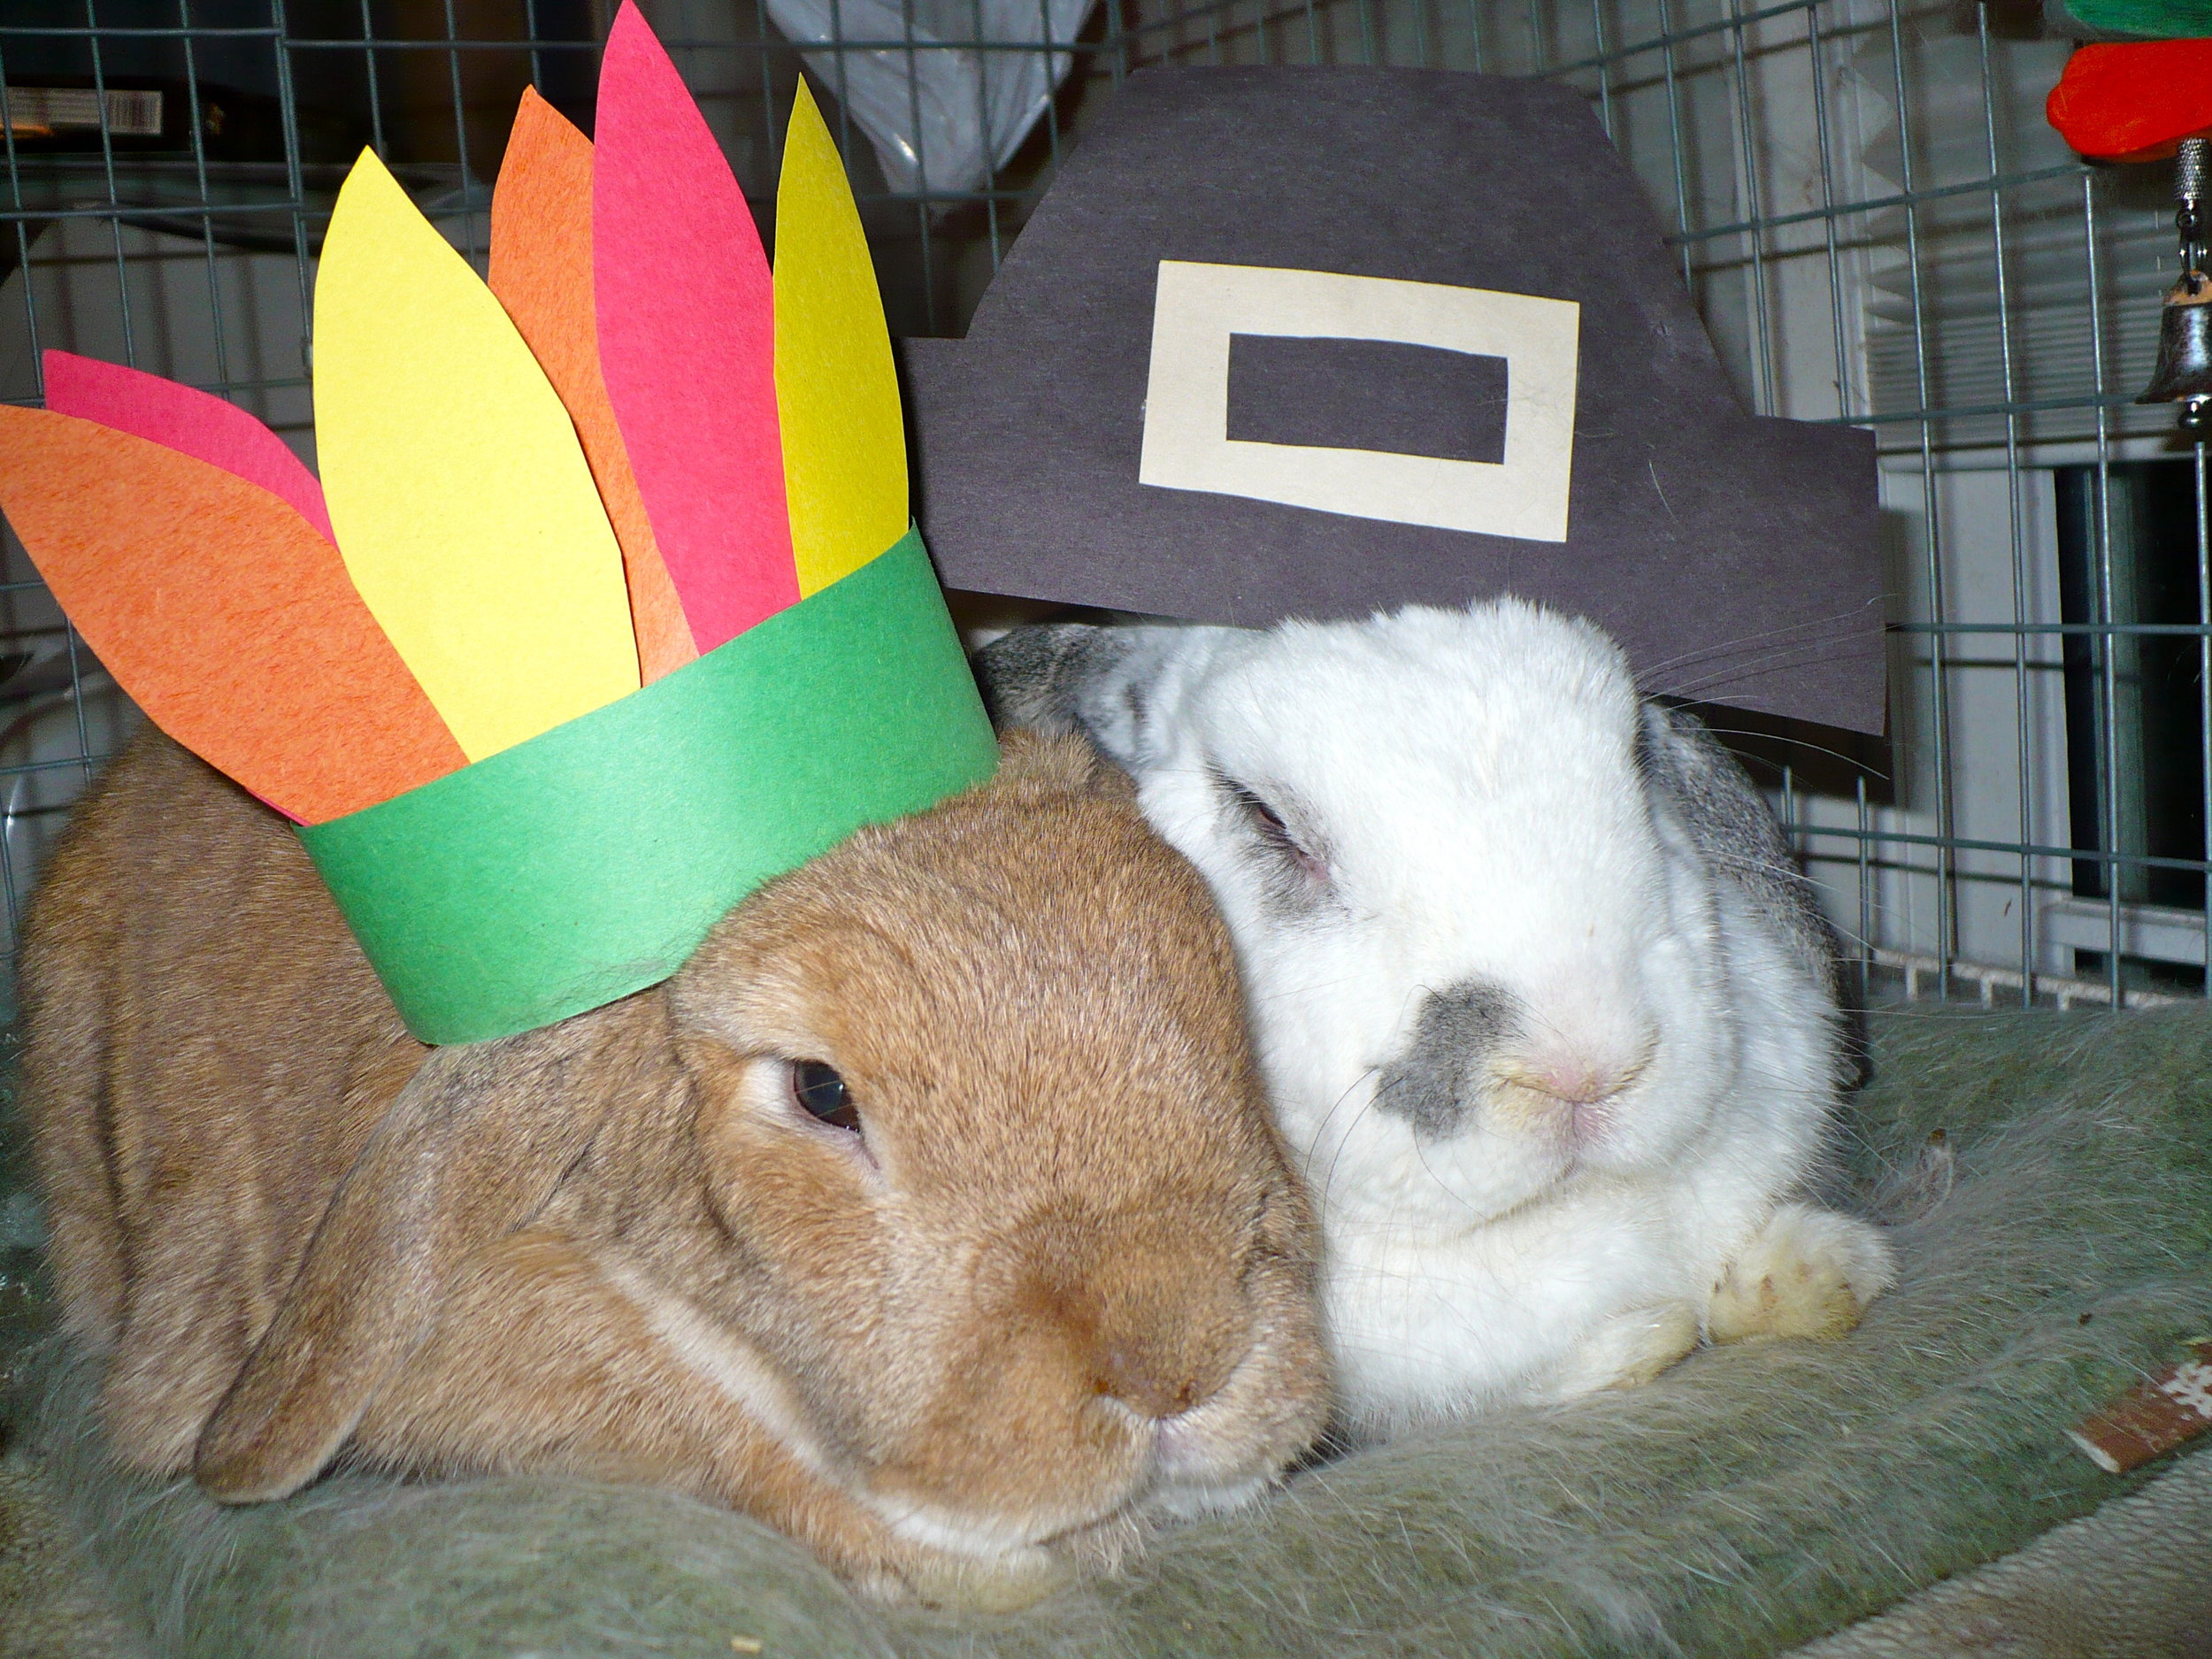 Bunnies Wear Their Thanksgiving Hats for the Holiday